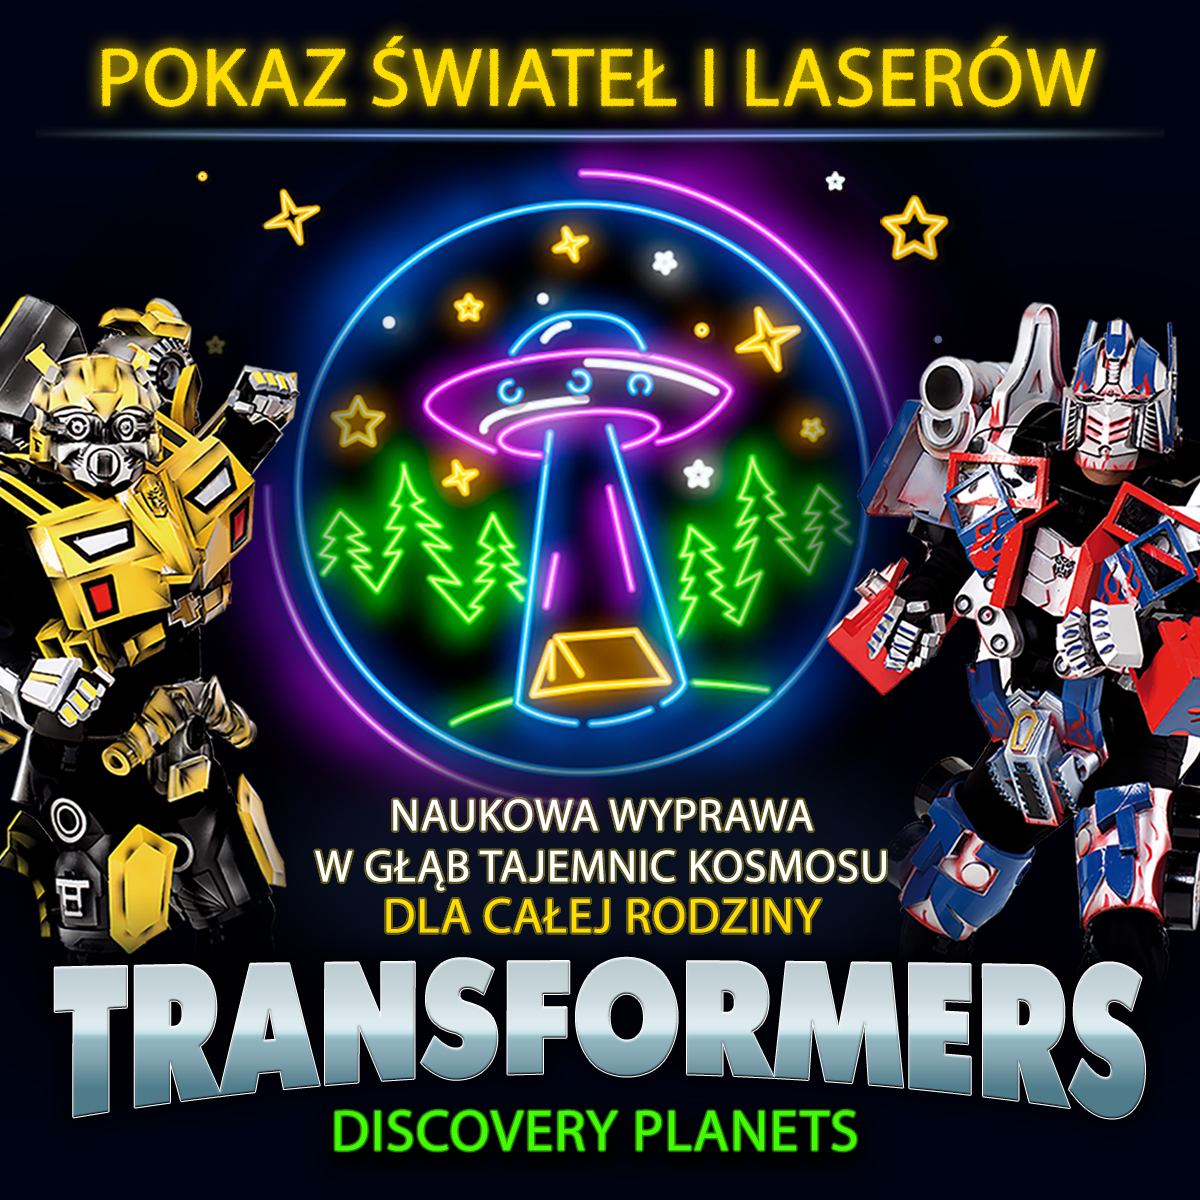 TRANSFORMERS - DISCOVERY PLANETS